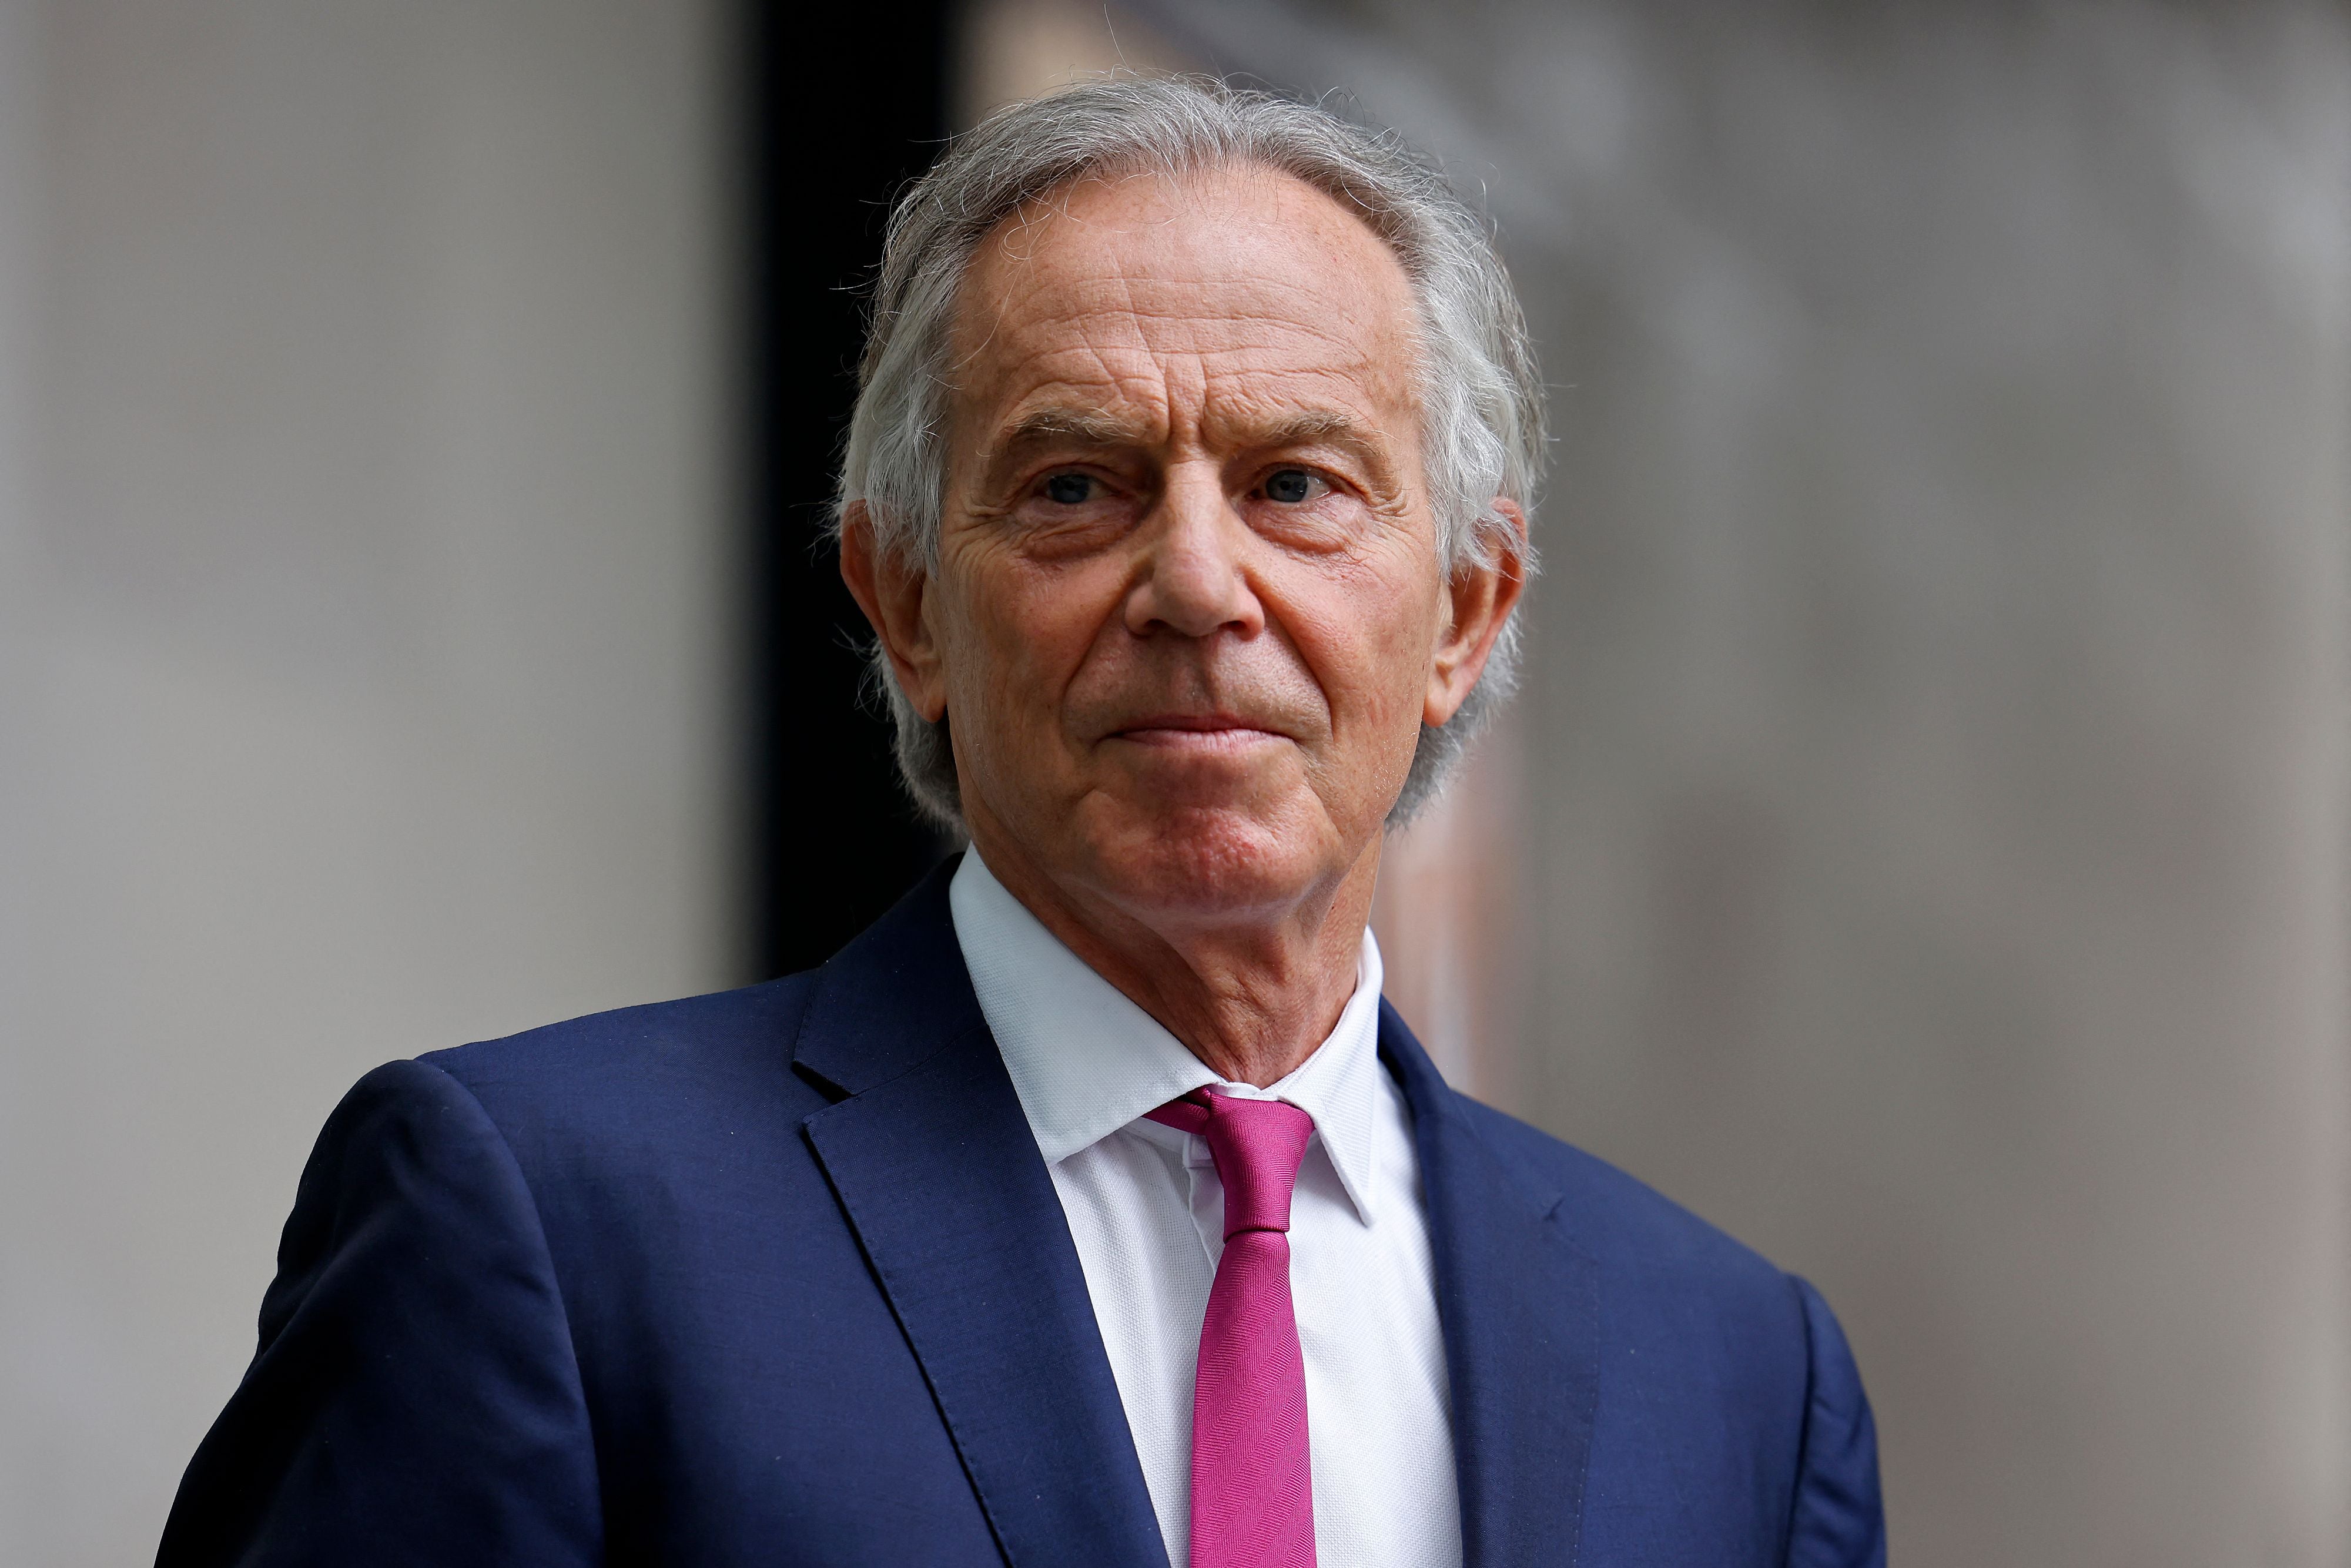 Tony Blair, ‘a colossus who understood the art of government’